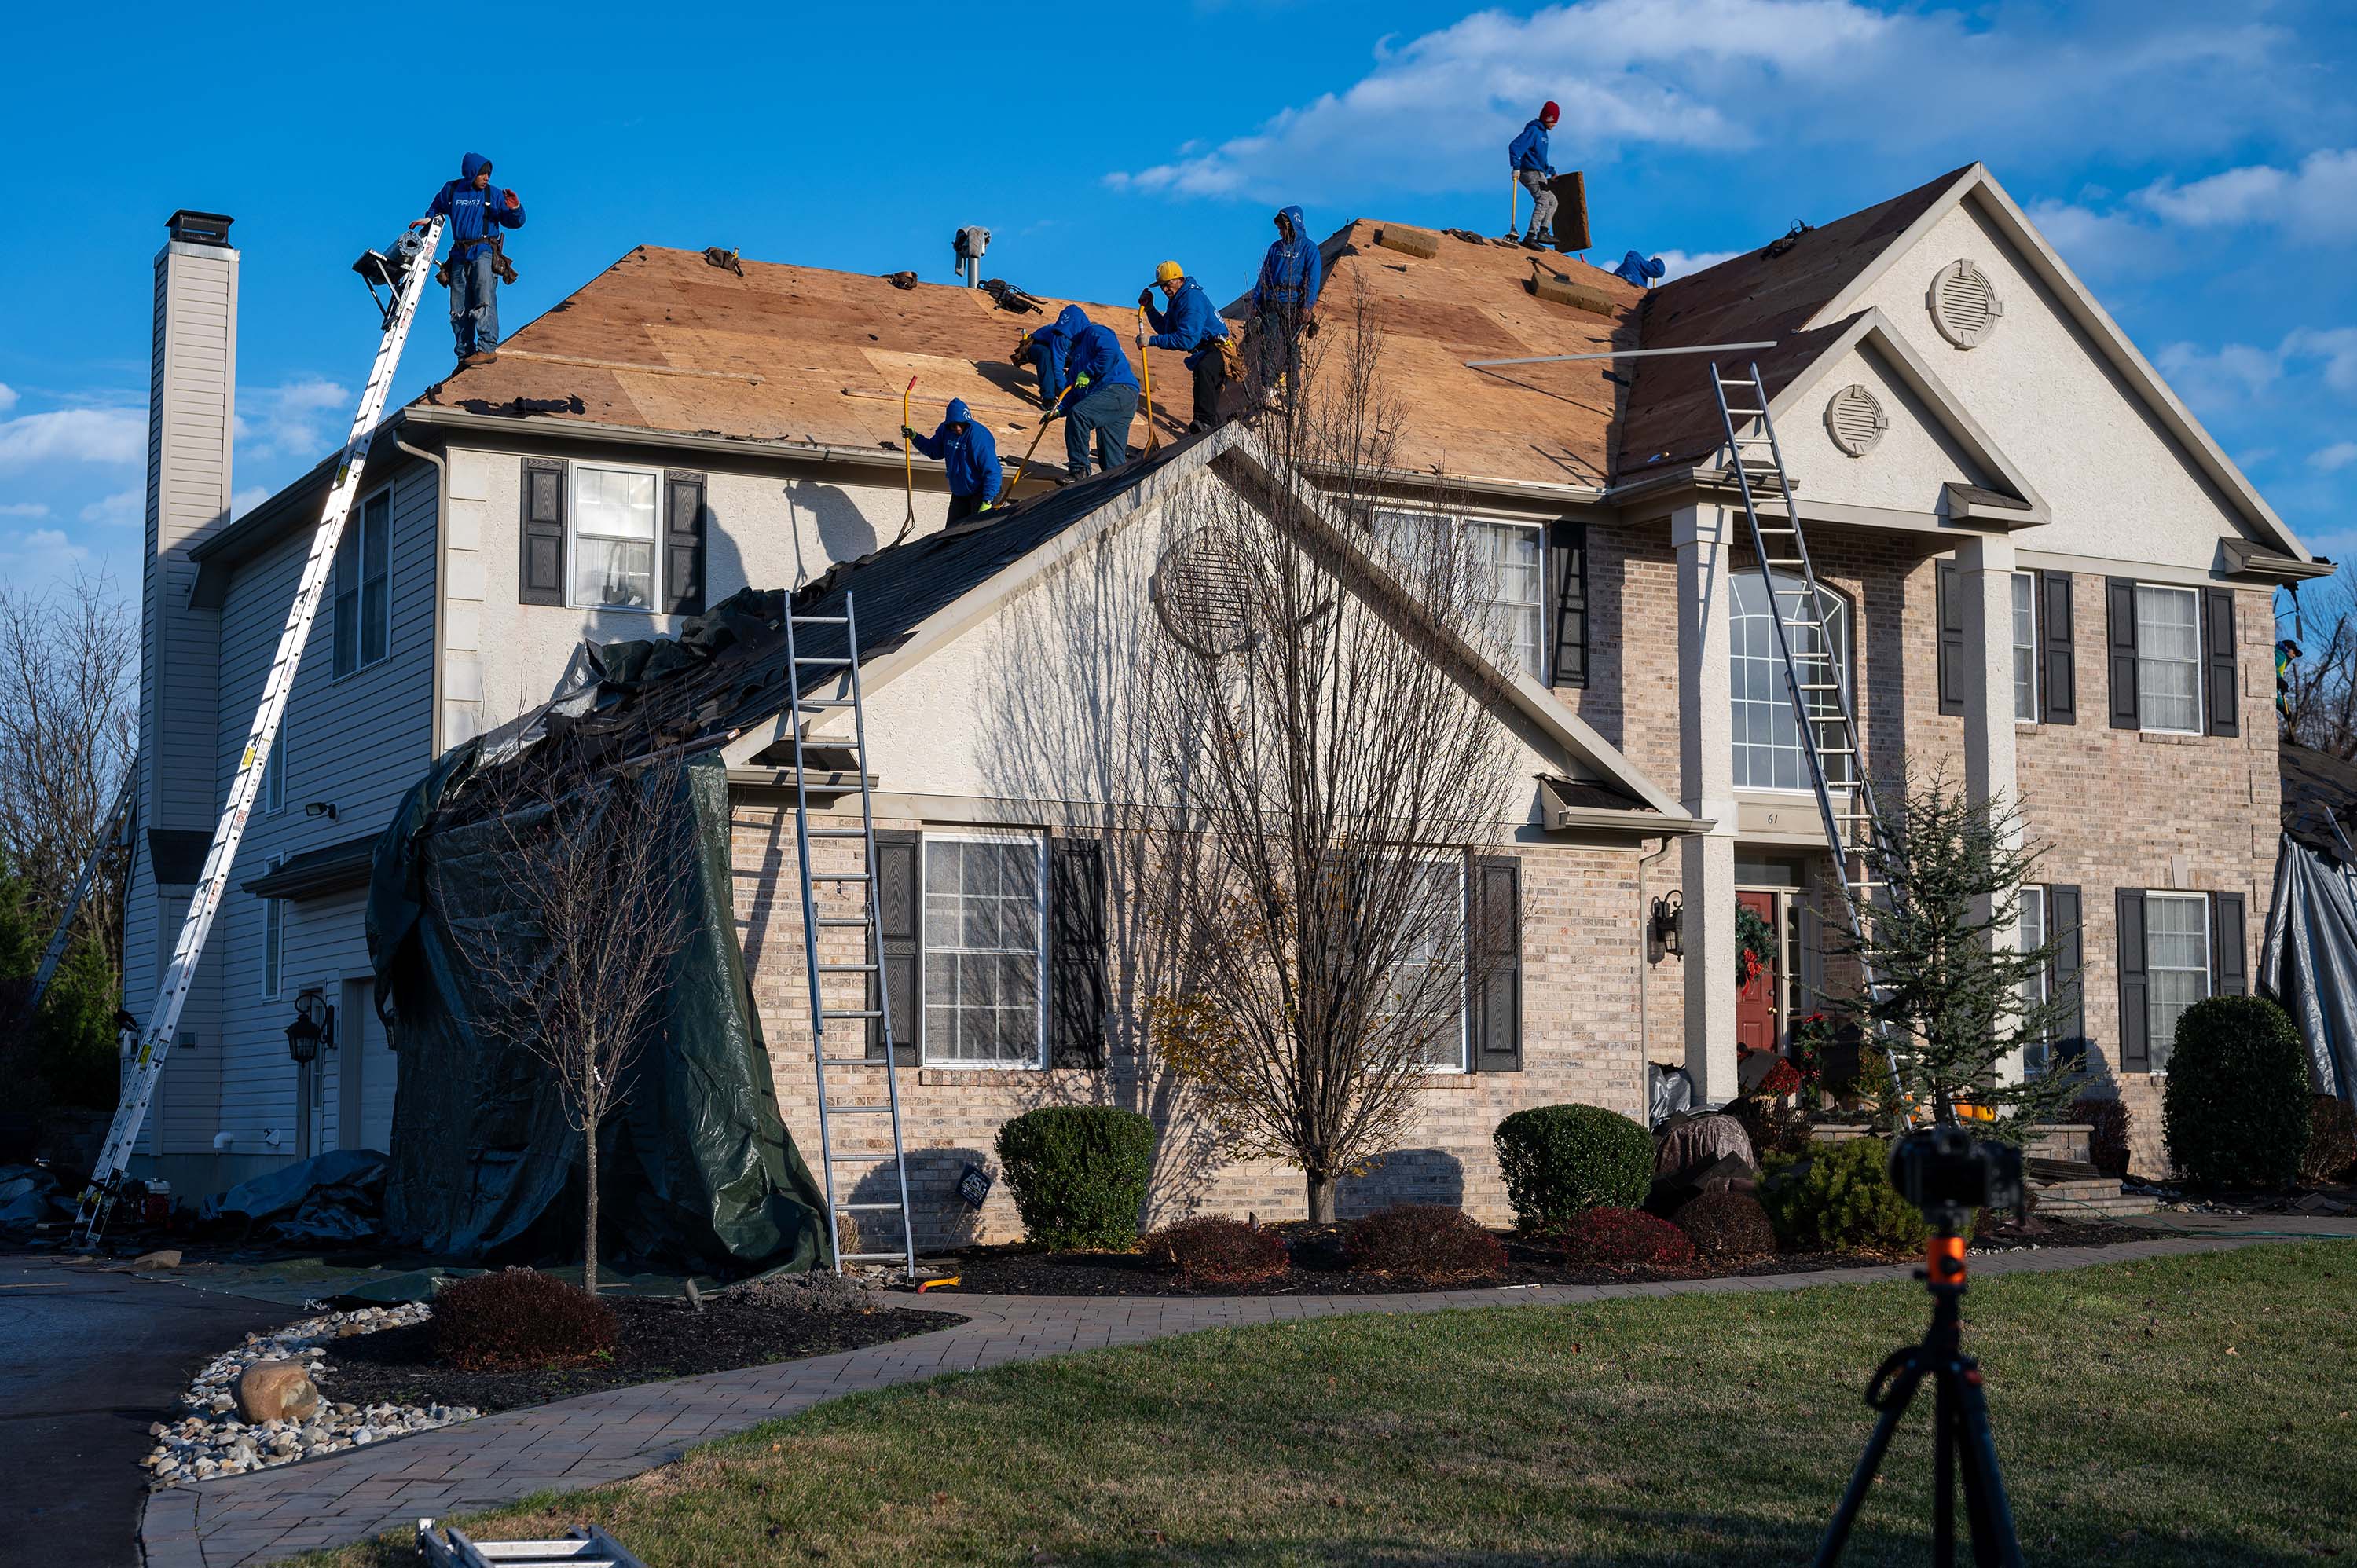 Roofing repair company - residential roofing contractors in Hillsdale (large image)